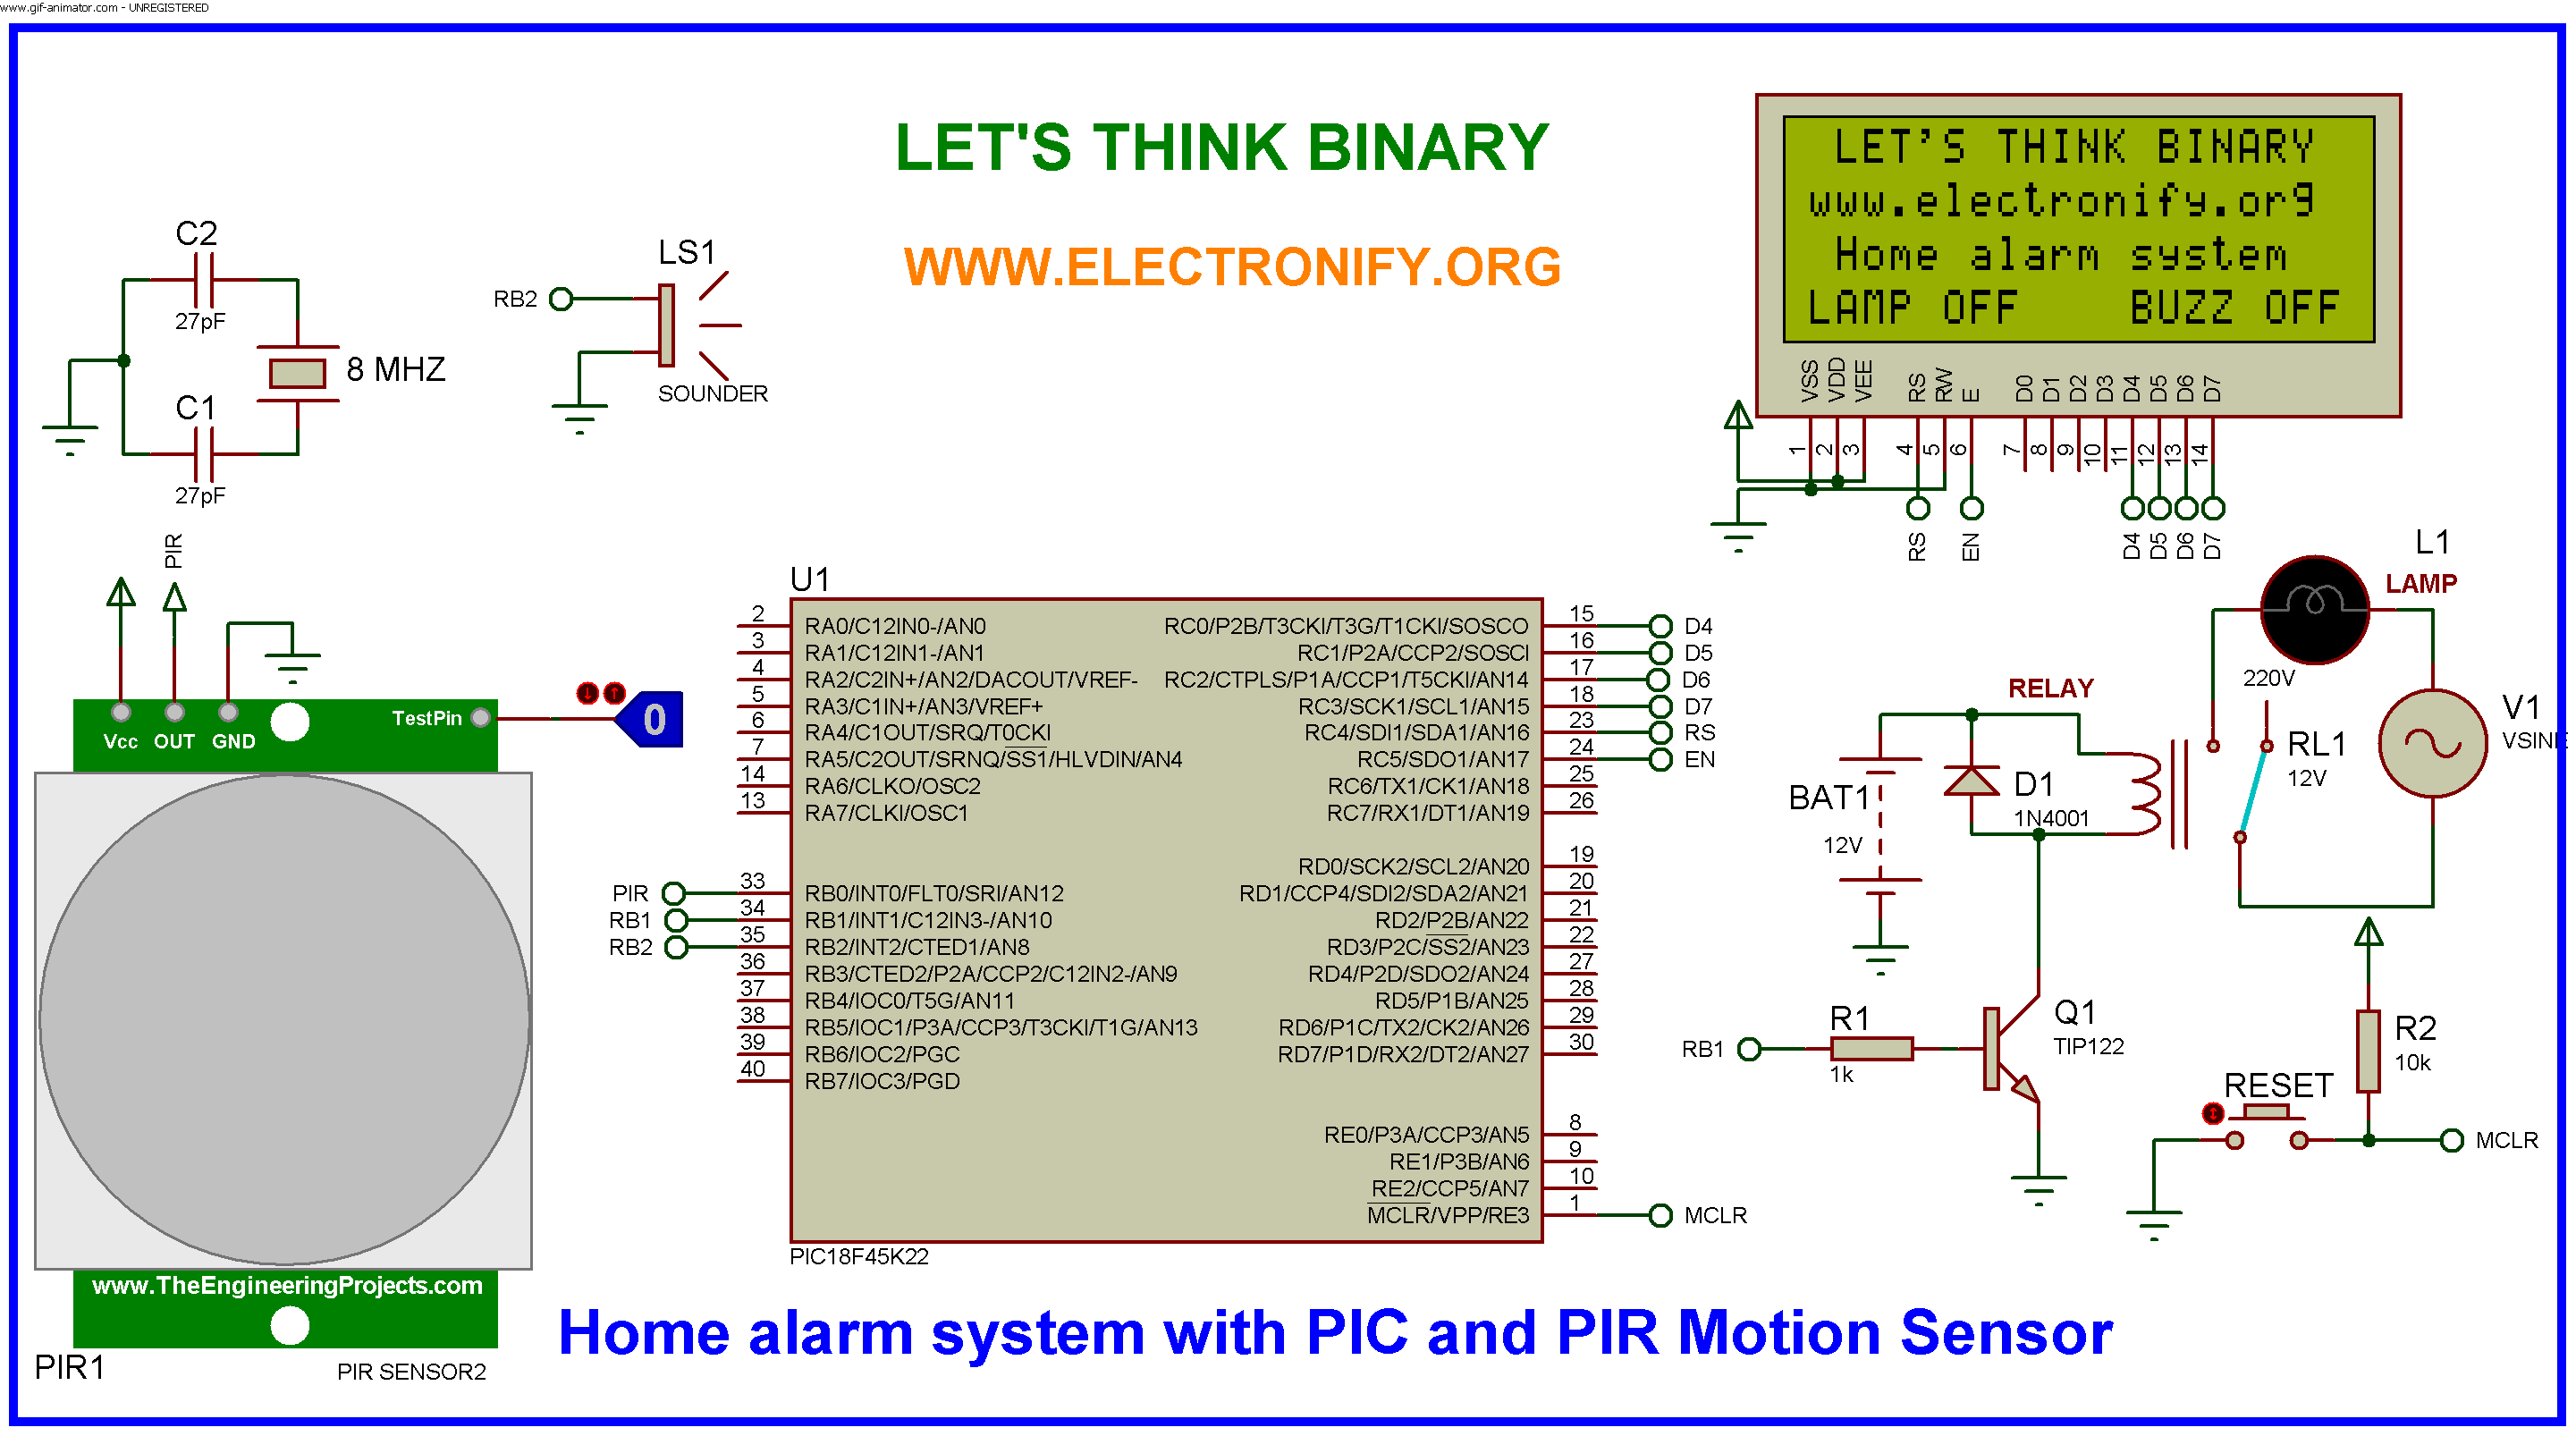 HOME SECURITY ALARM SYSTEM USING PIC18F45K22 AND PIR MOTION SENSOR2 schematic diagram